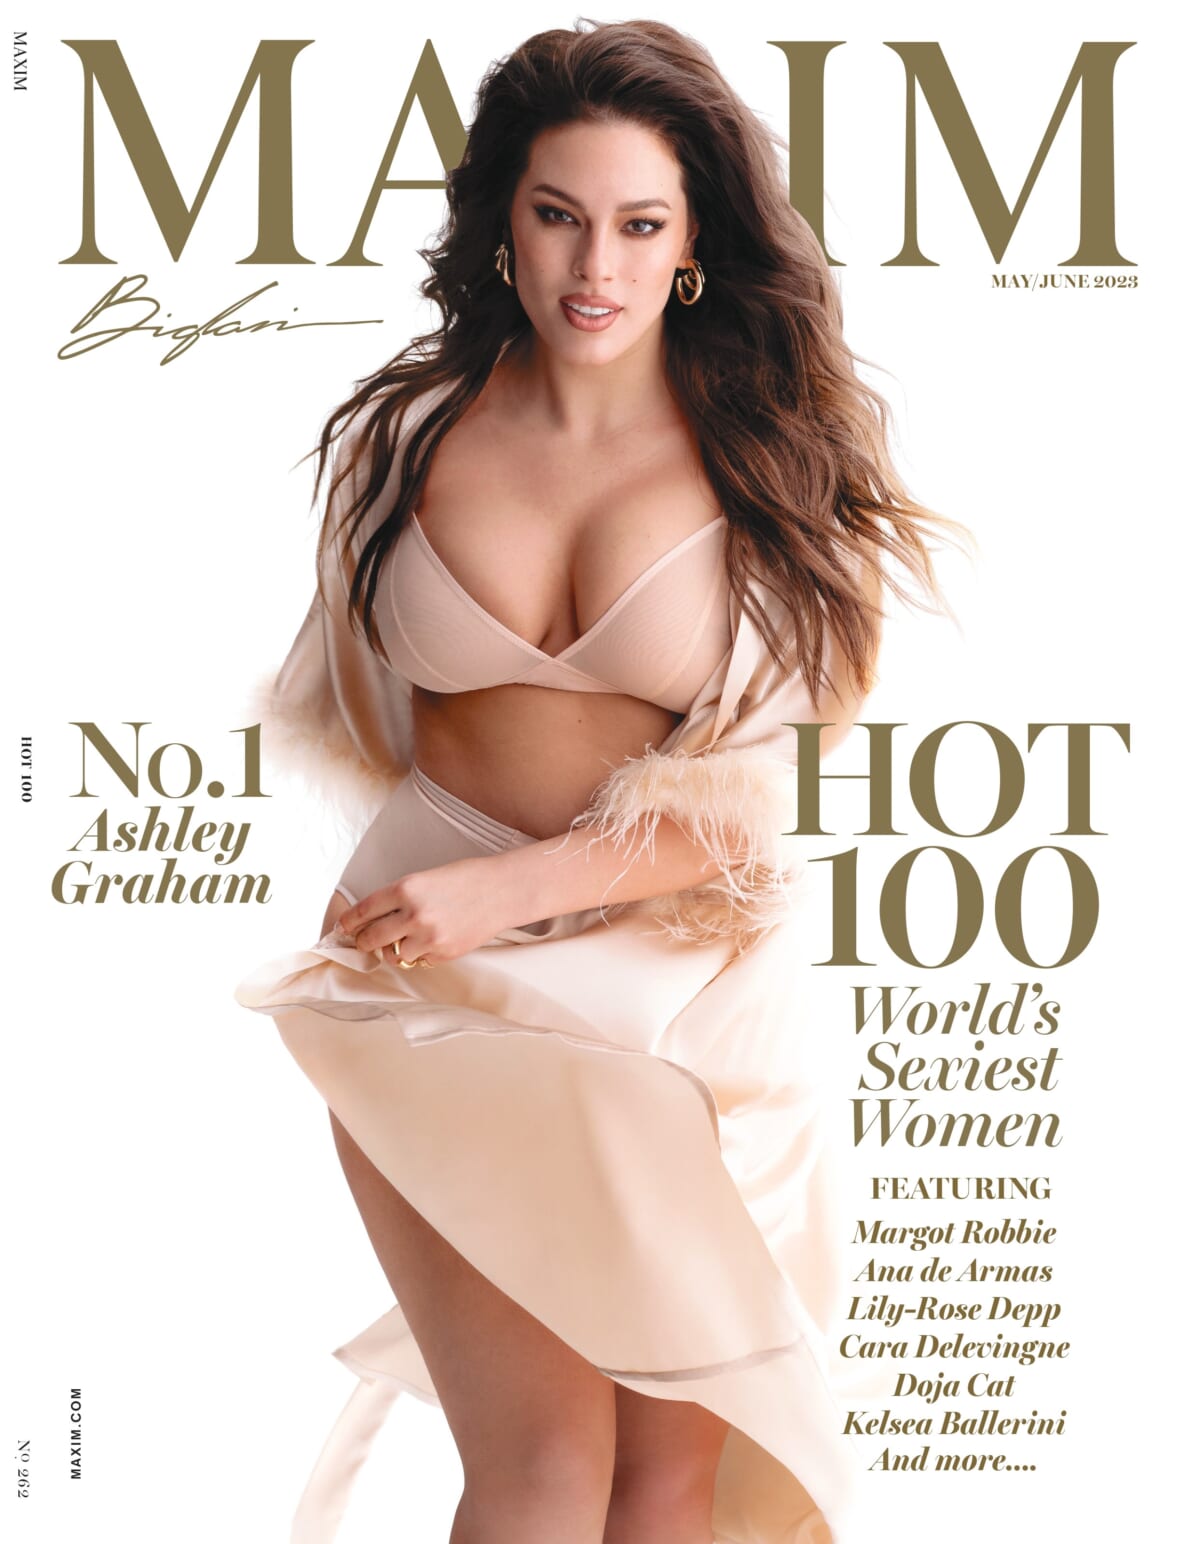 Worlds Sexiest Woman Ashley Graham Is Maxims 2023 Hot 100 Cover Star pic